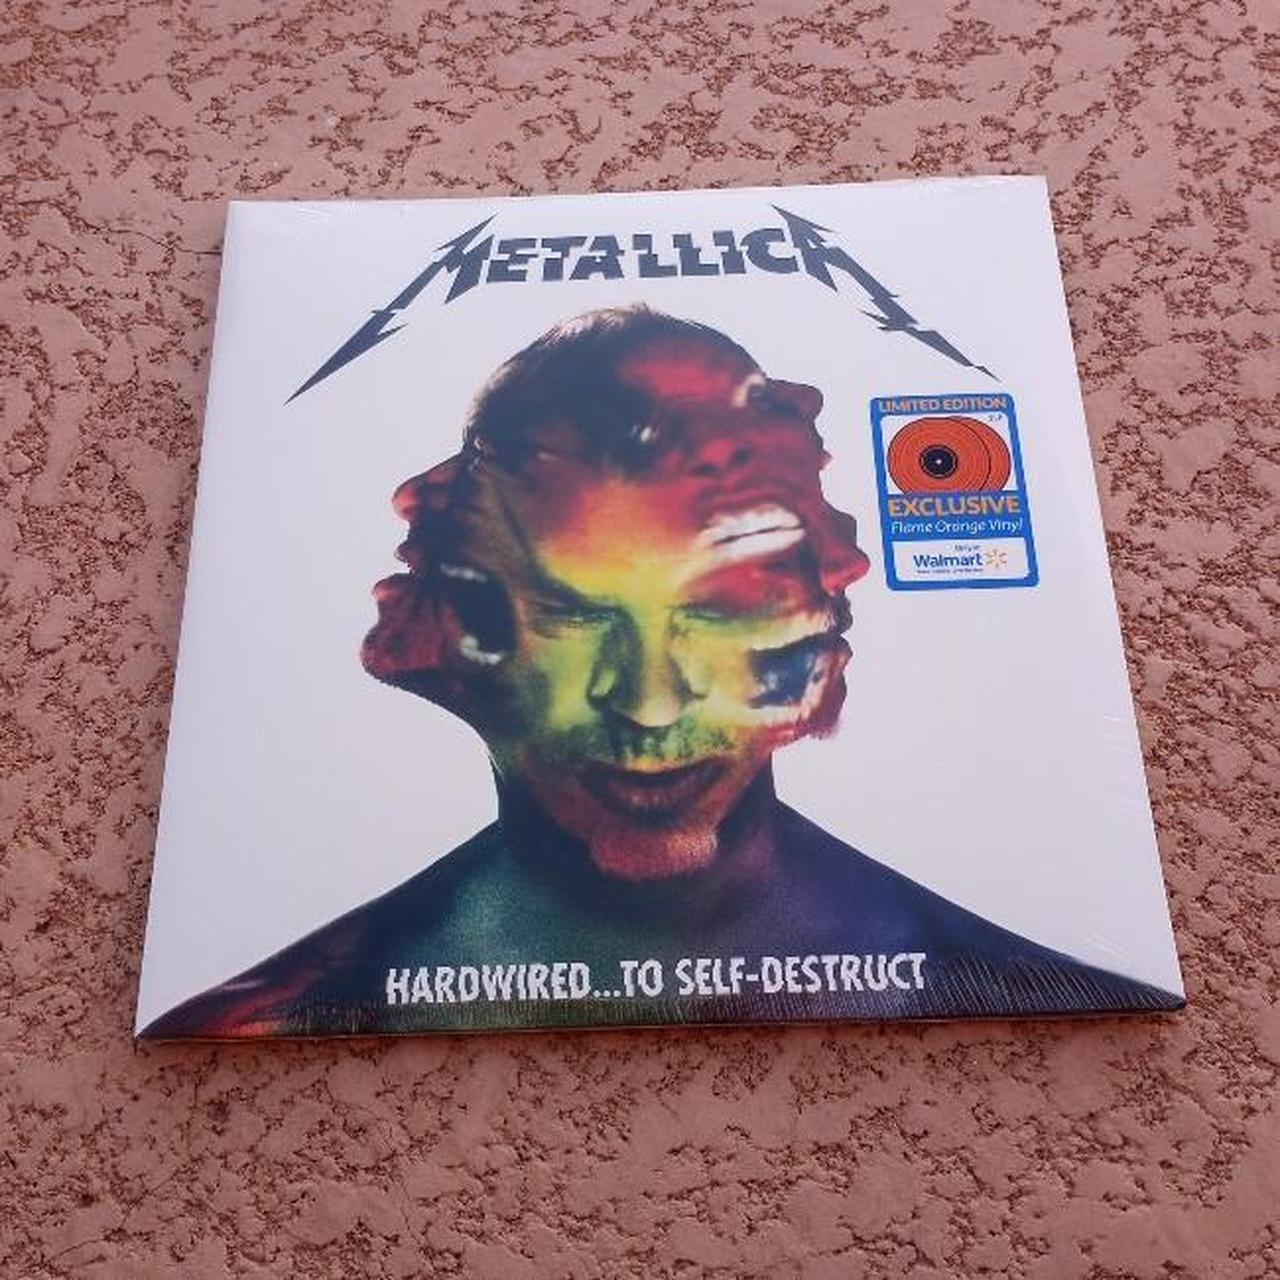 METALLICA RECORD This is a brand new, still sealed, - Depop